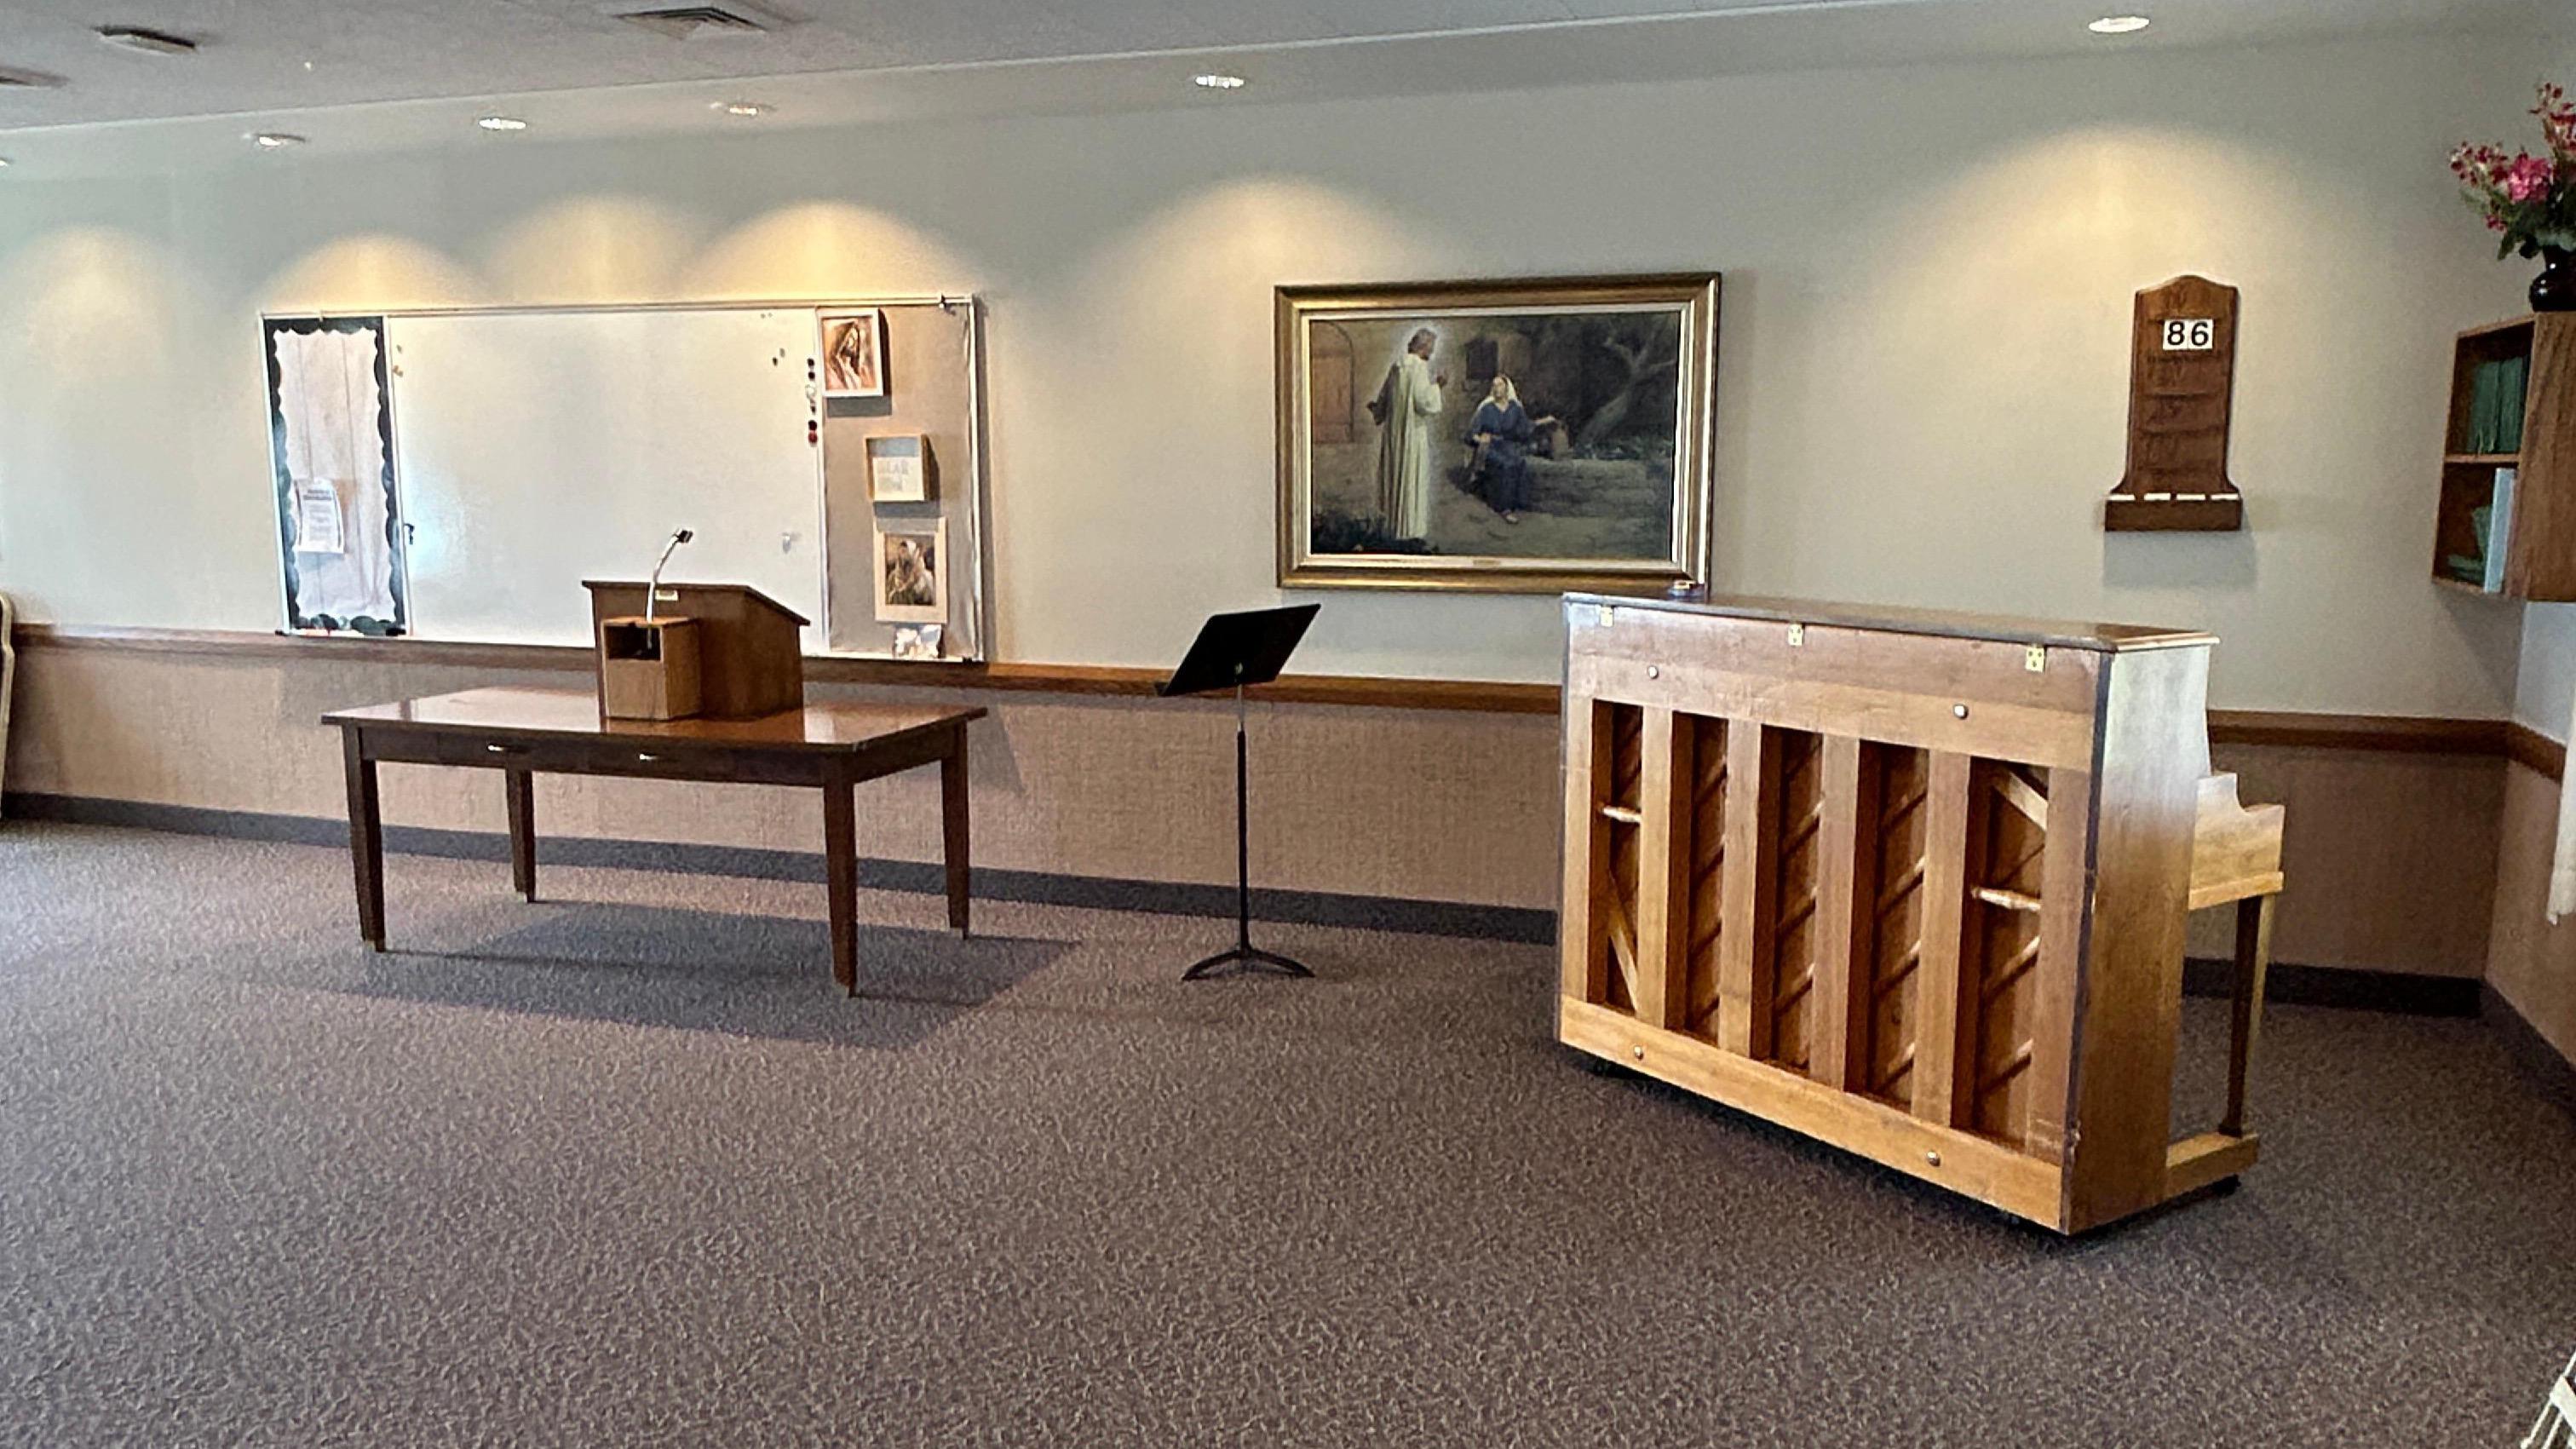 Image 8 | The Church of Jesus Christ of Latter-day Saints